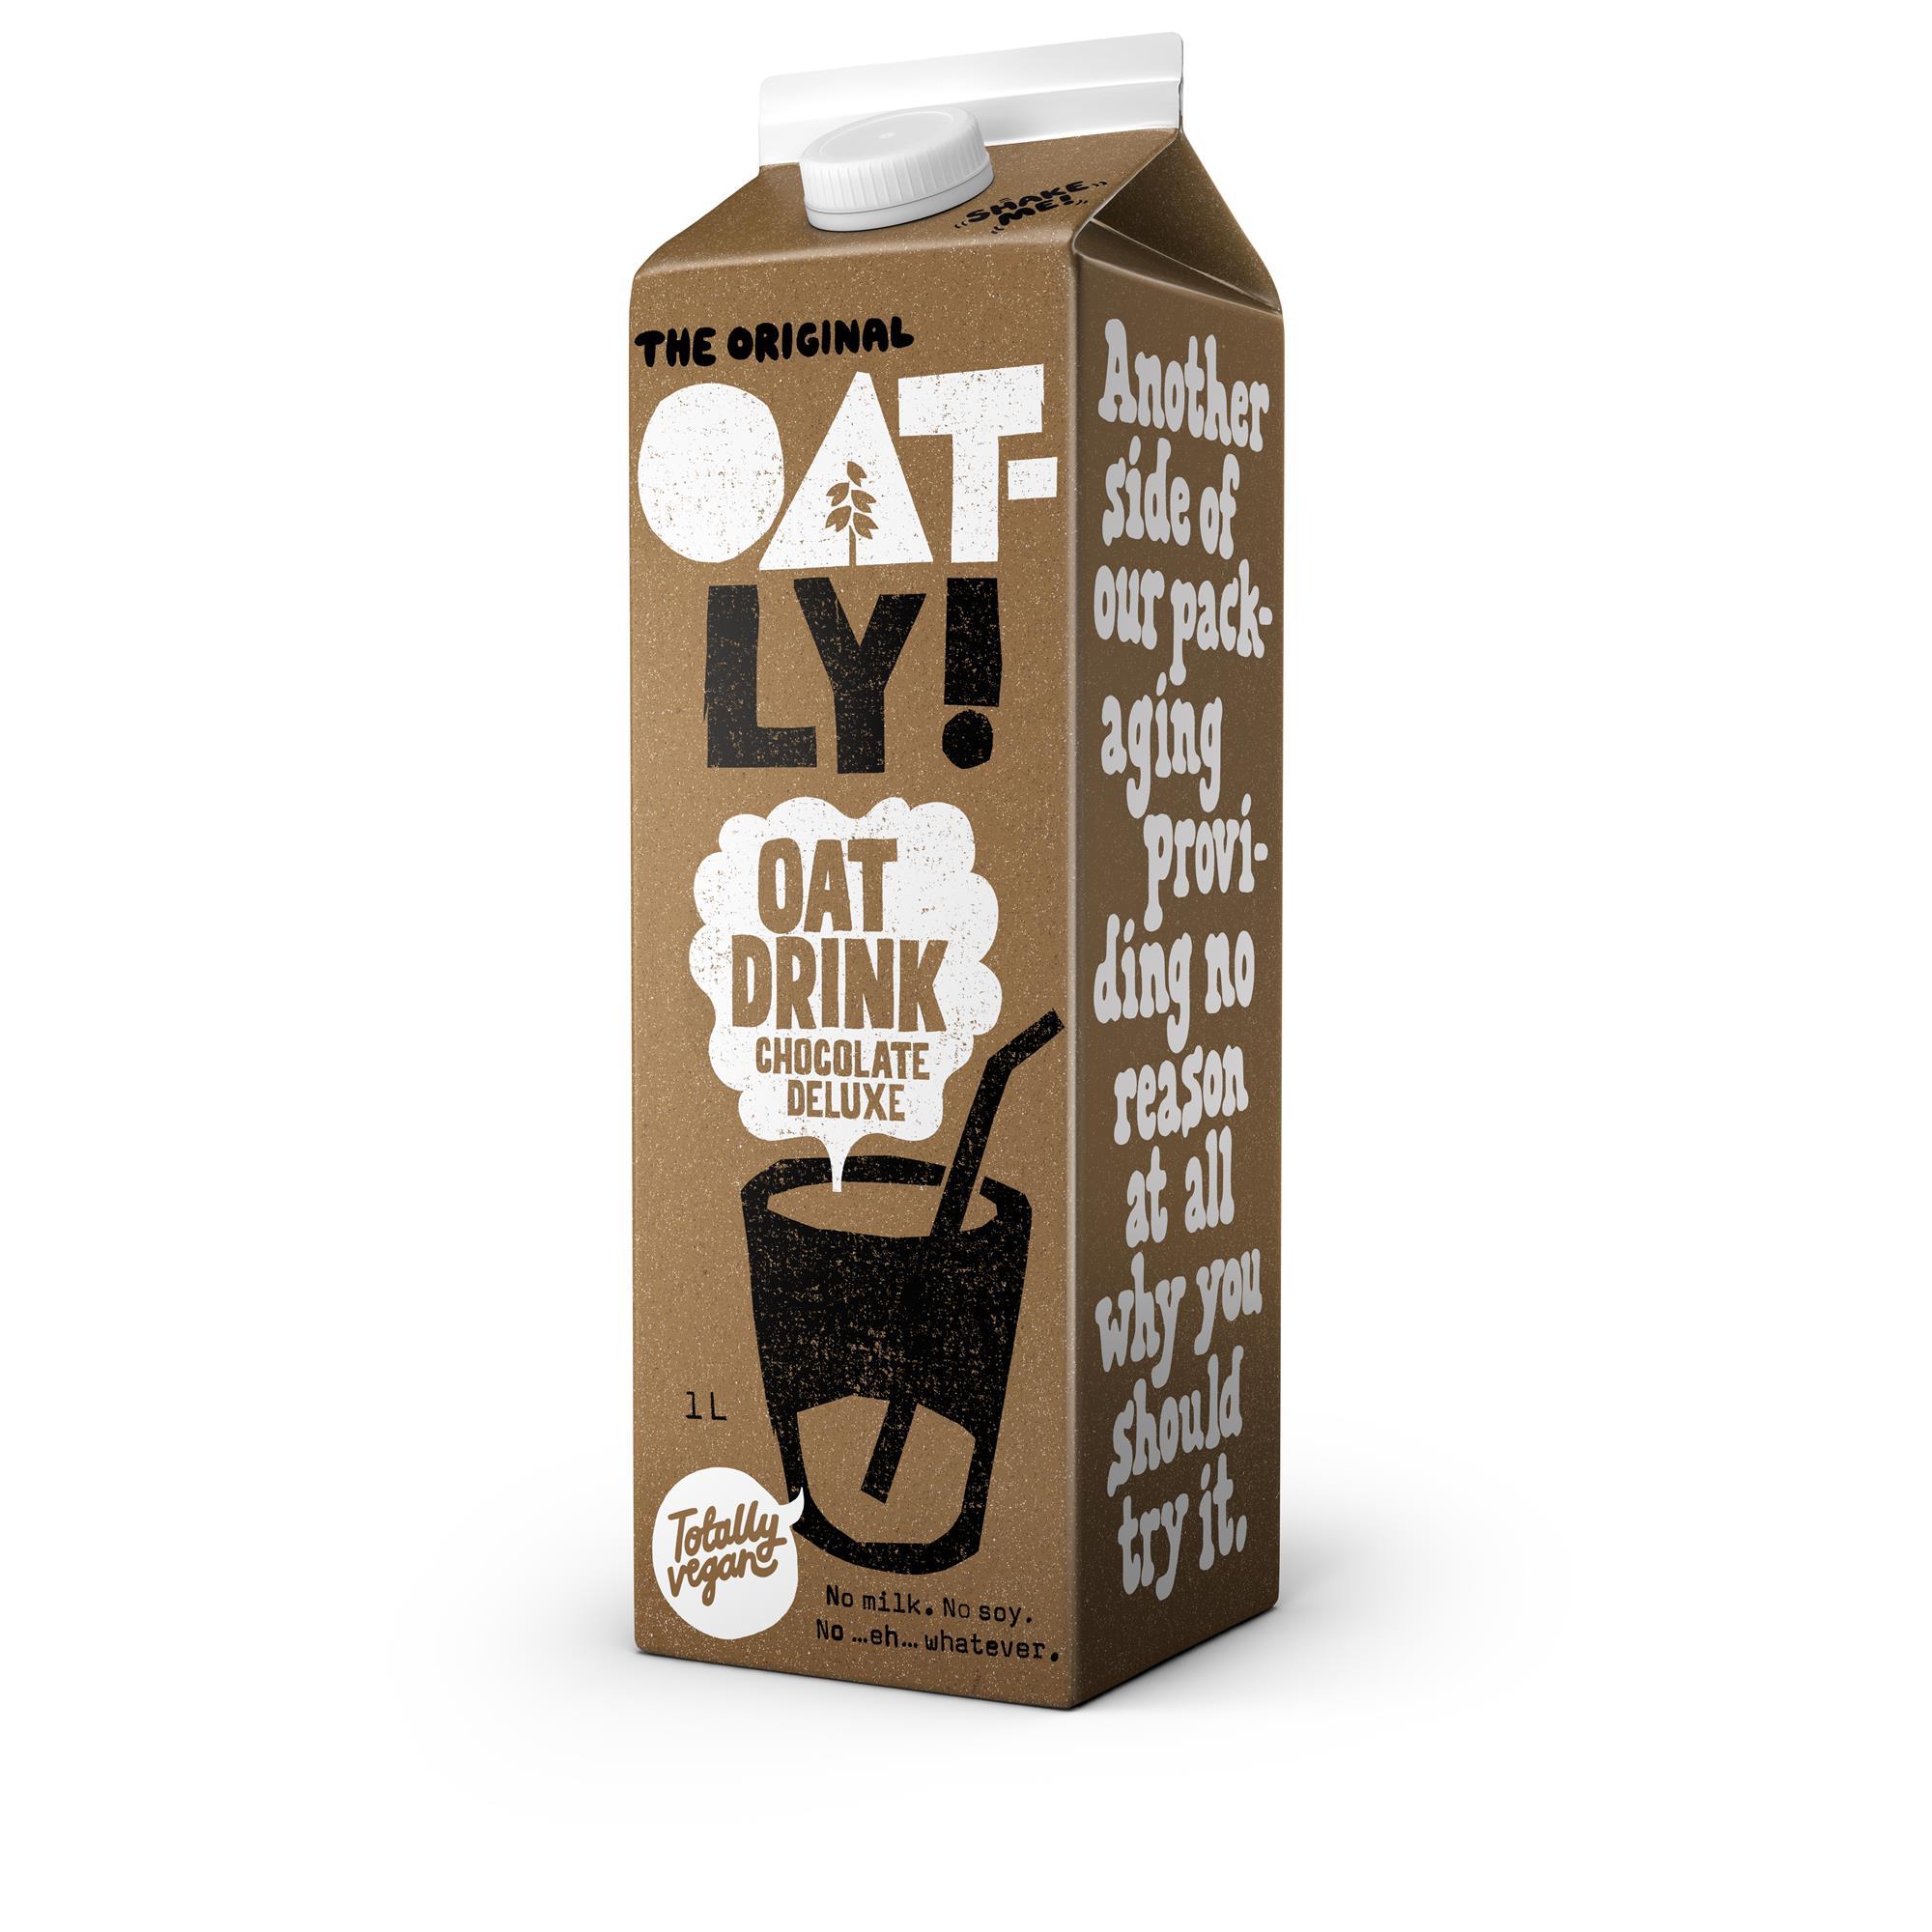 Oatly adds ‘deluxe’ chocolate oat drink | News | The Grocer